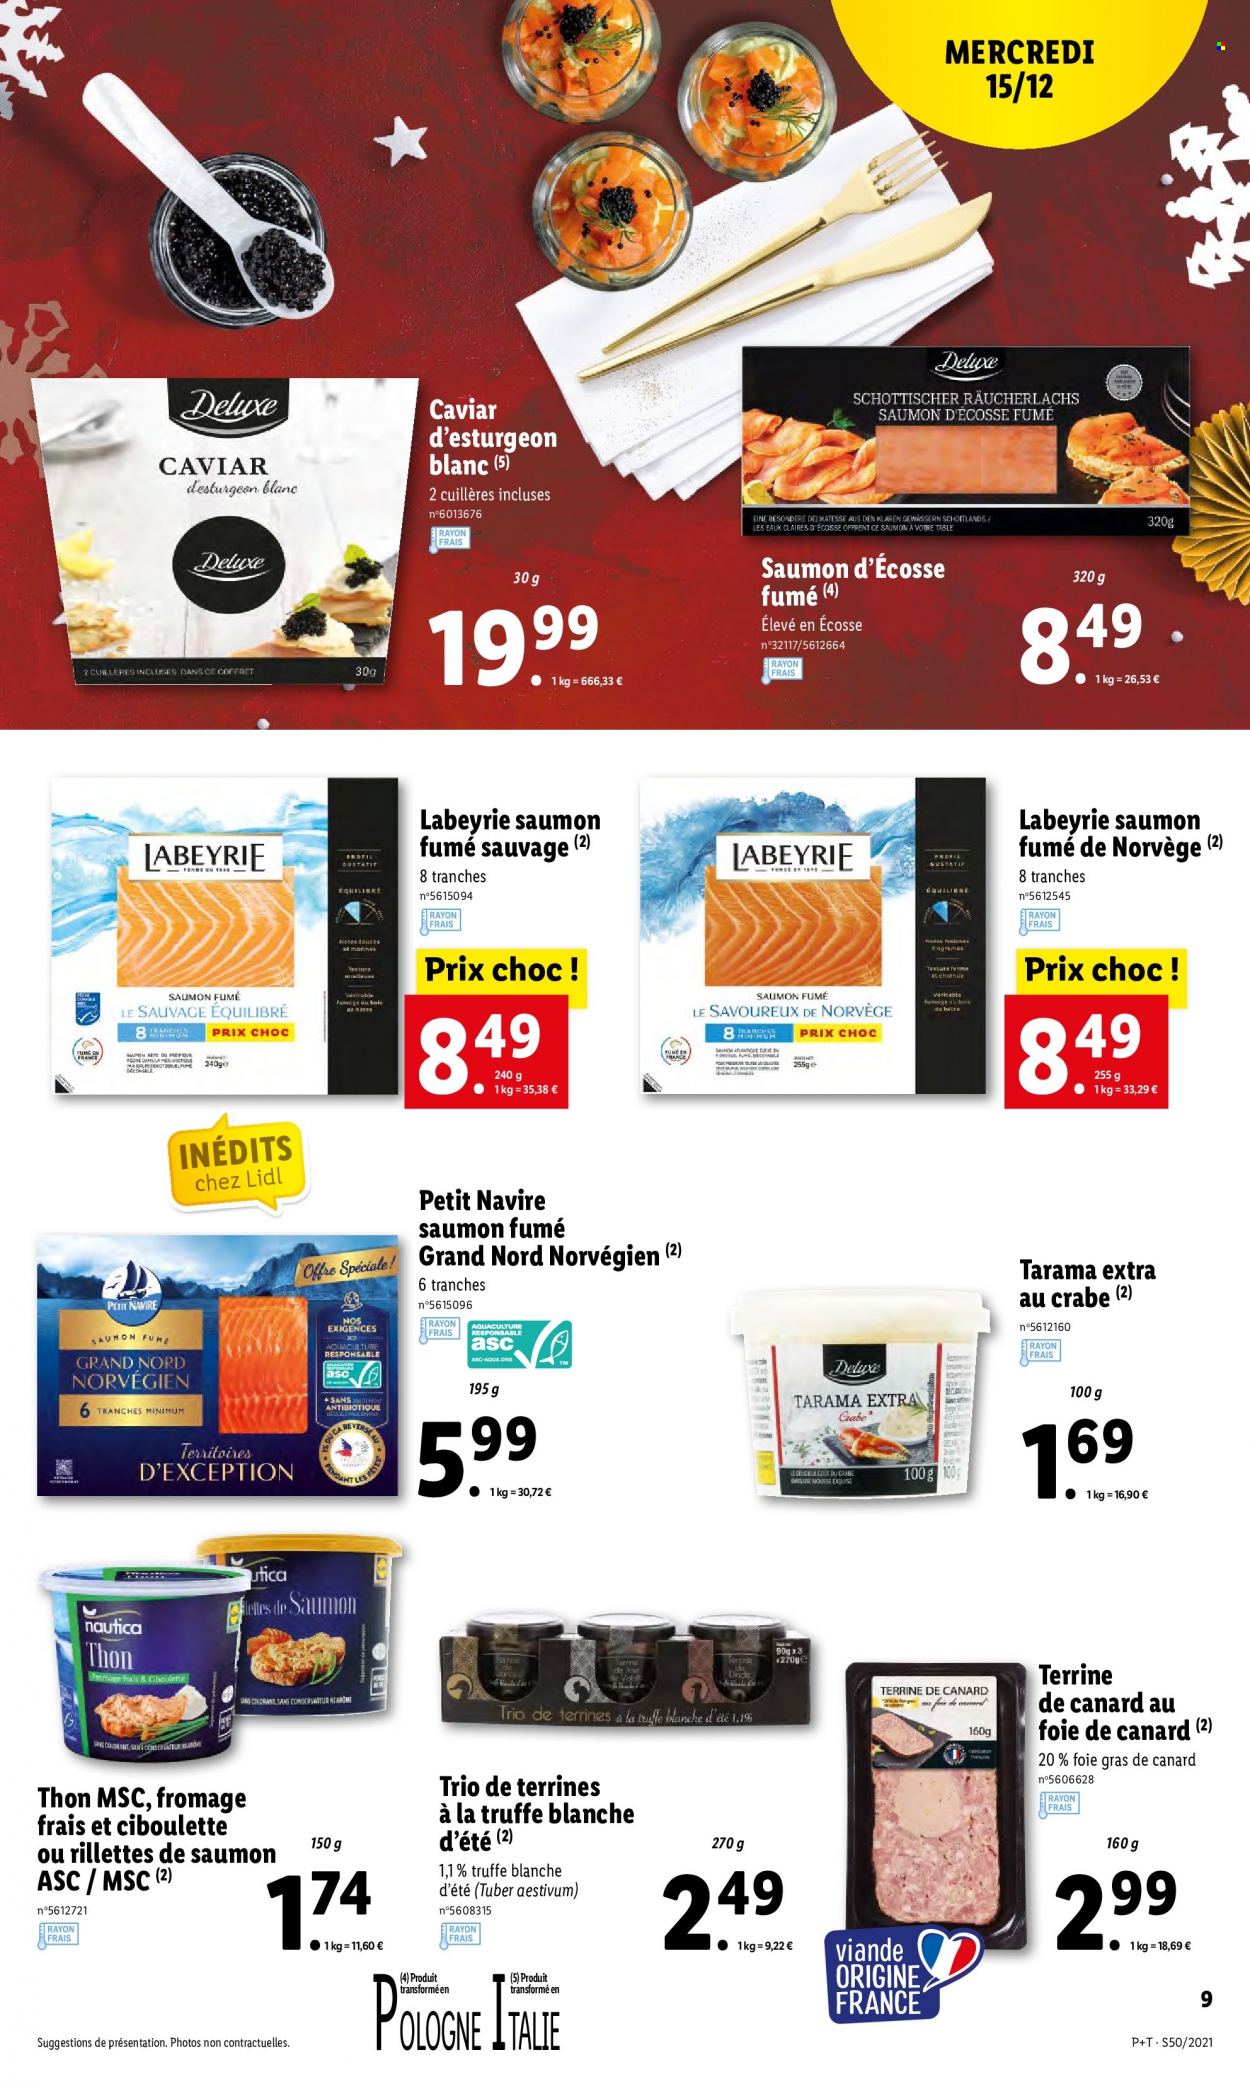 Catalogue Lidl - 15.12.2021 - 21.12.2021. Page 9.